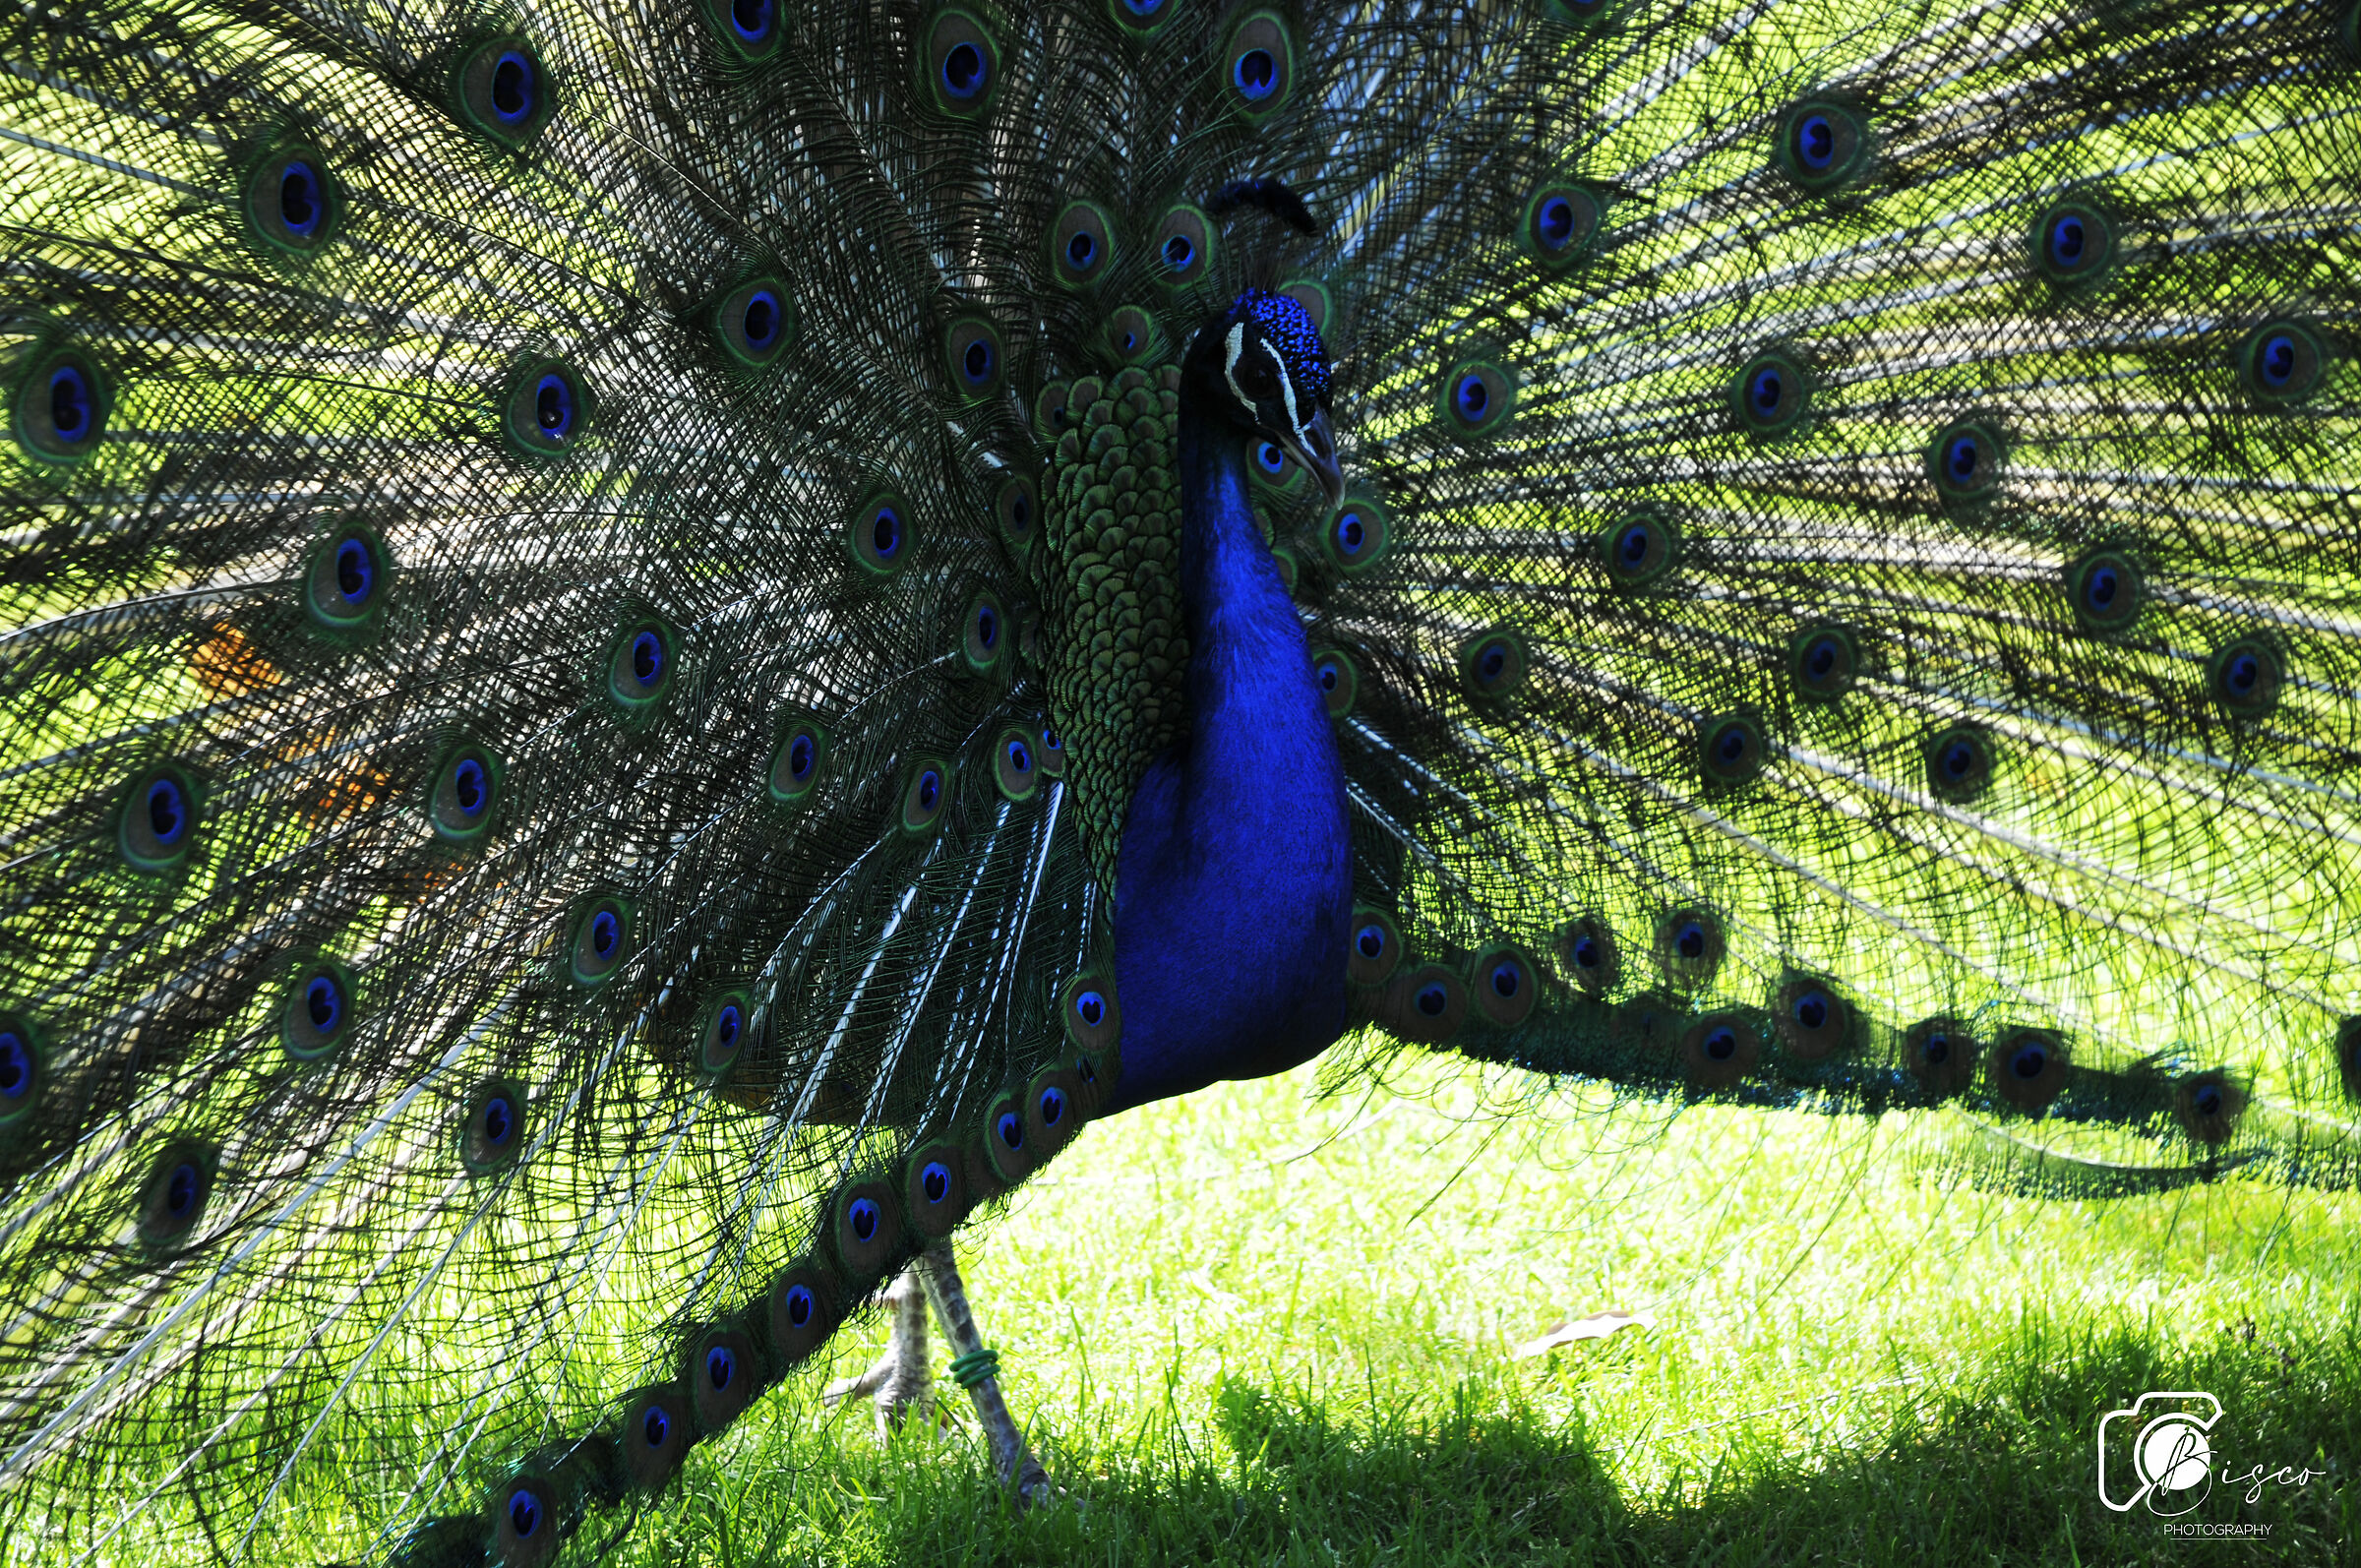 The Peacock of Mother Island (Lake Maggiore)...